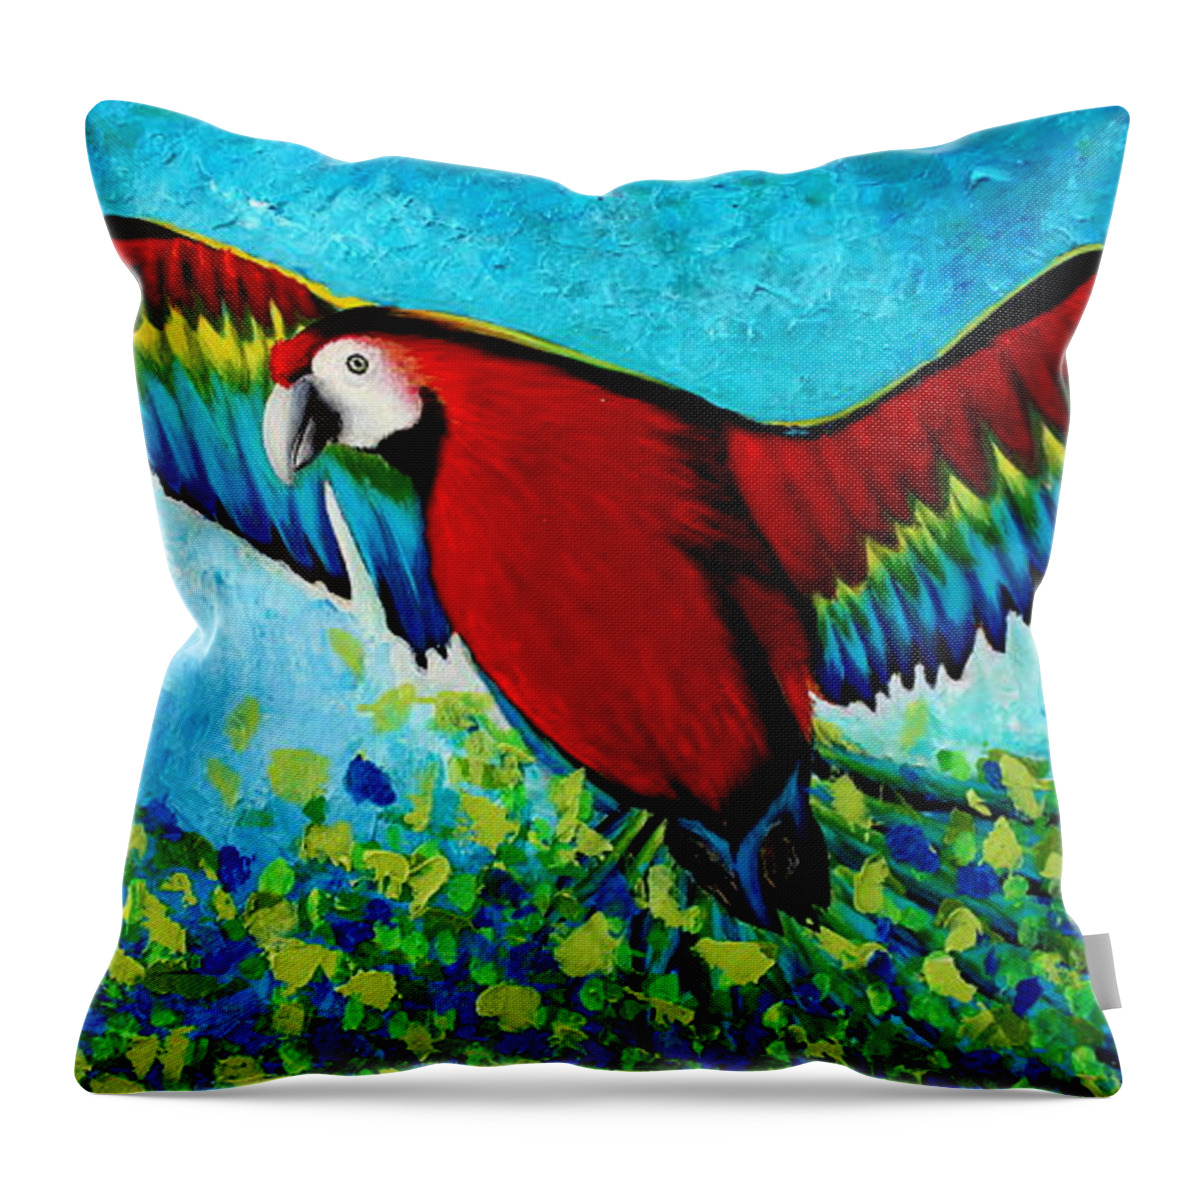 Contemporary Paintings Throw Pillow featuring the painting Spread your wings by Preethi Mathialagan